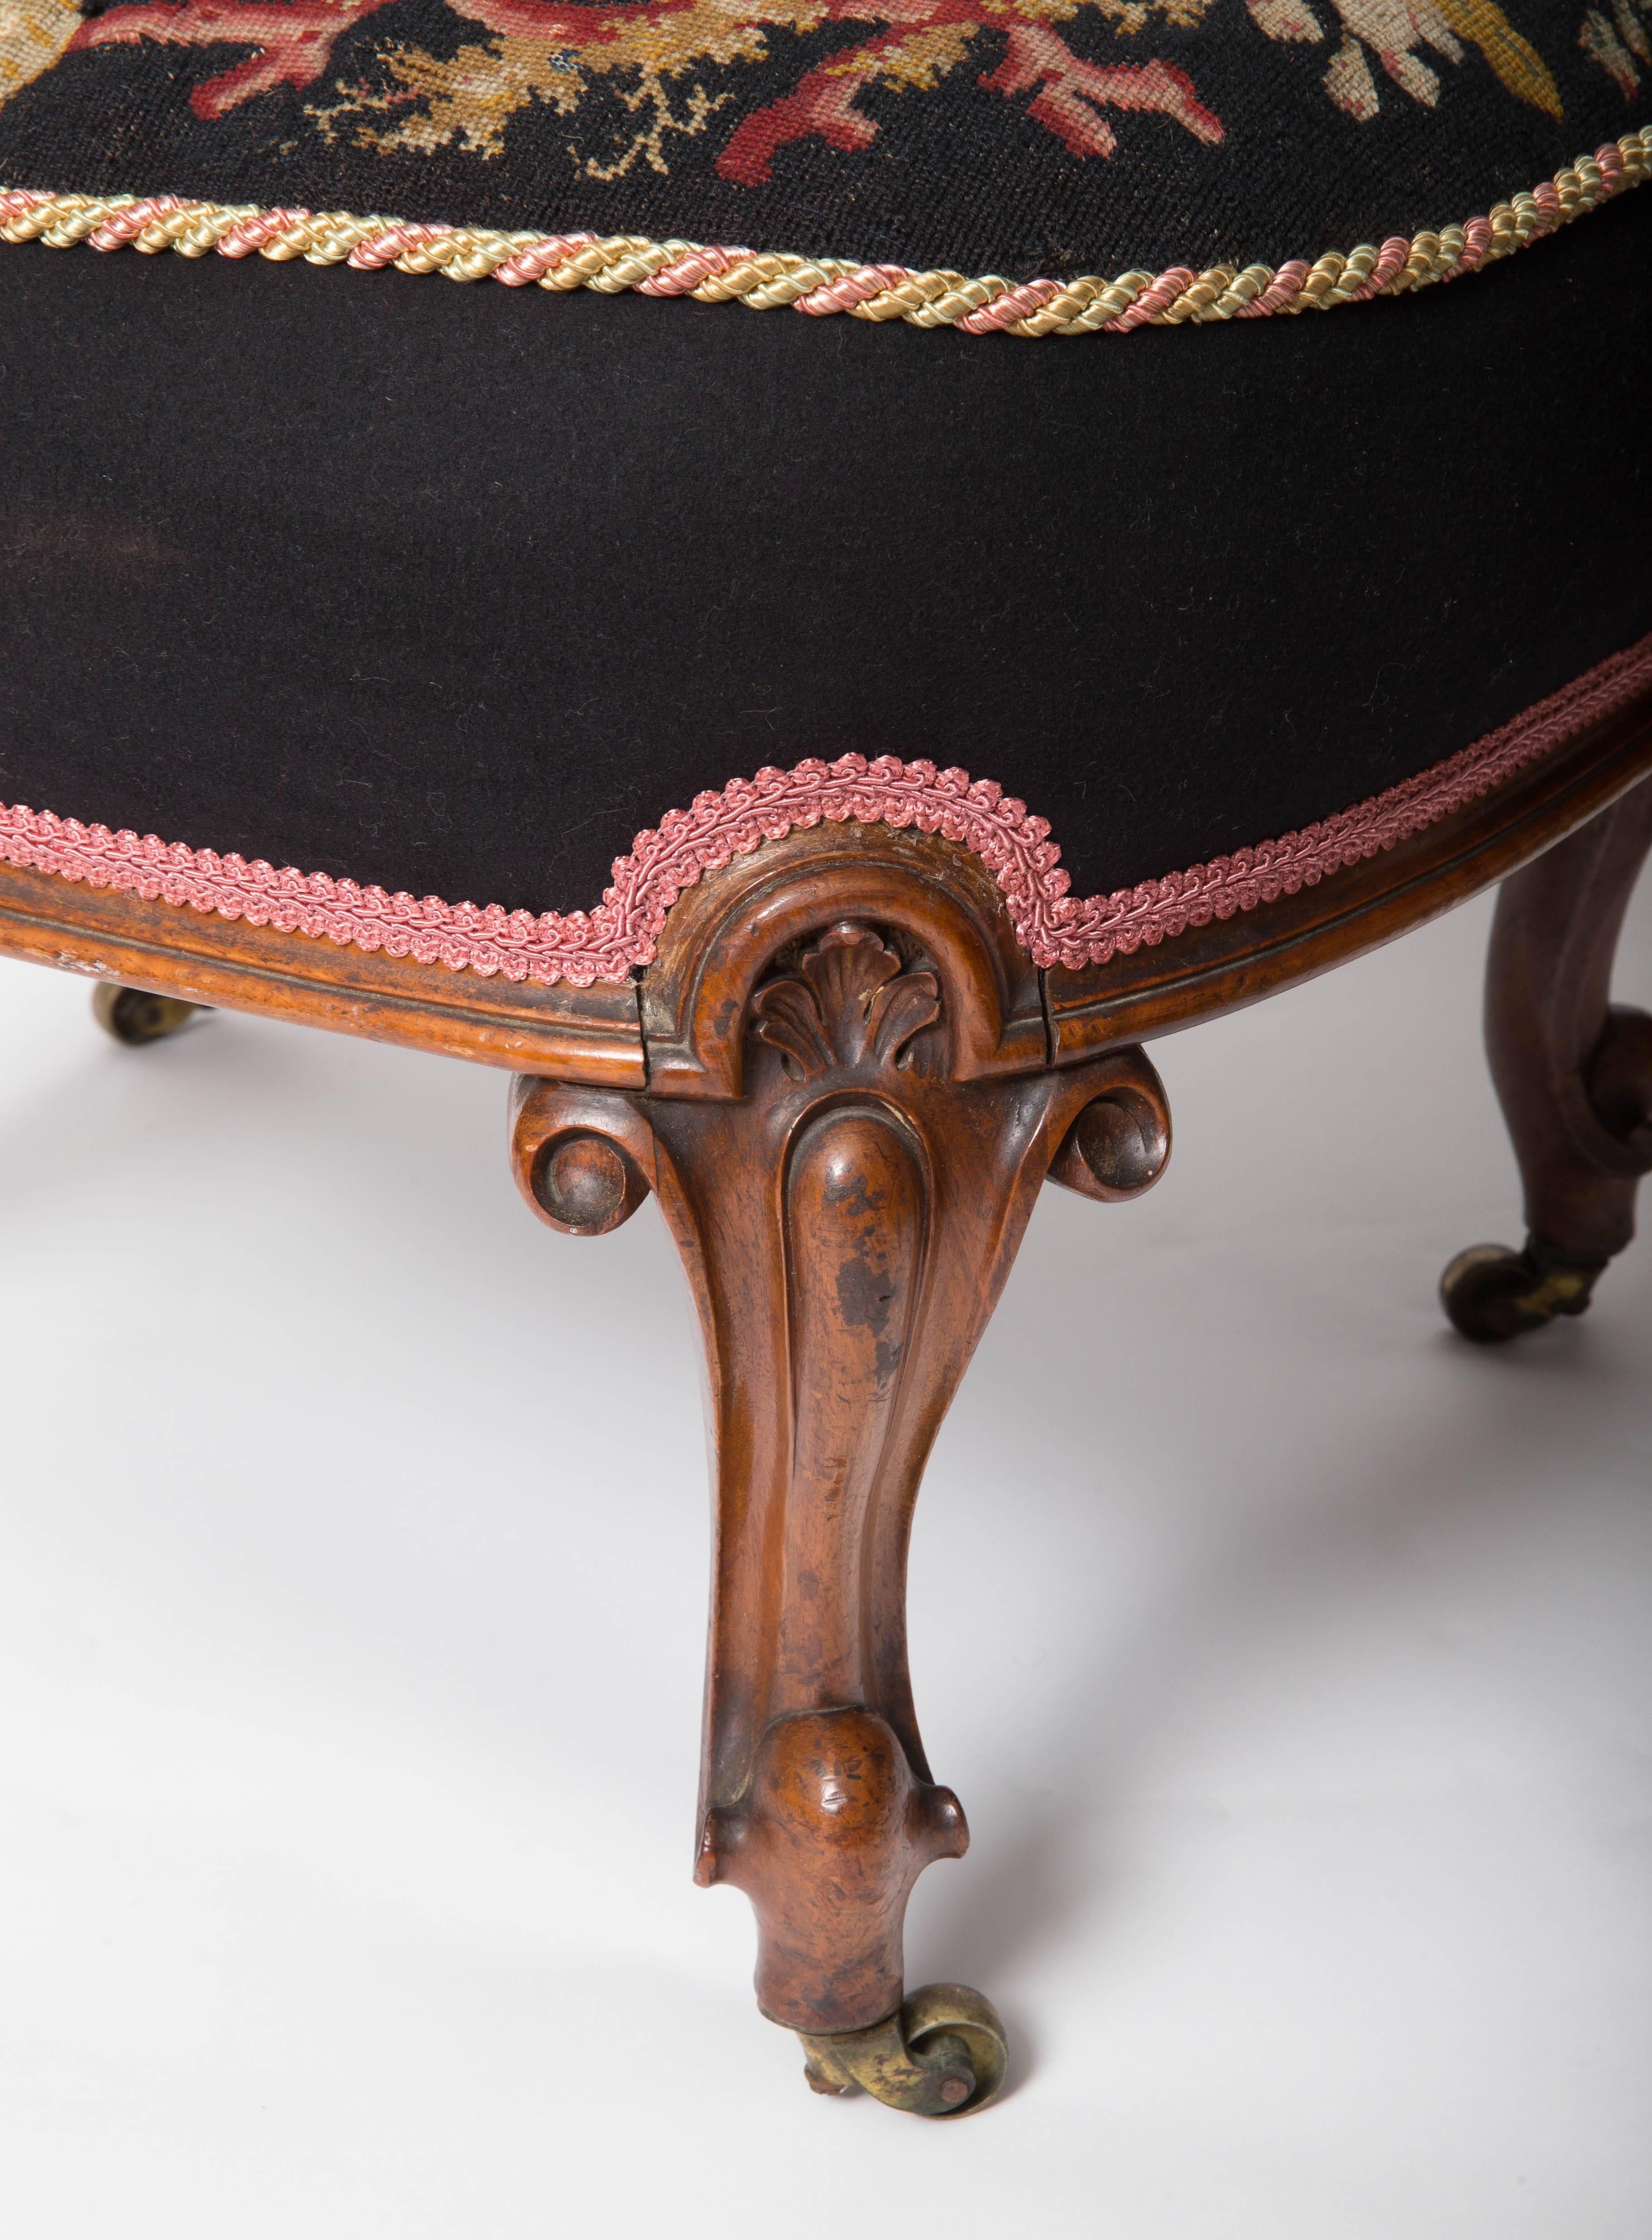 Mid-19th Century 19th Century Needlepoint Upholstered English Slipper Chair For Sale